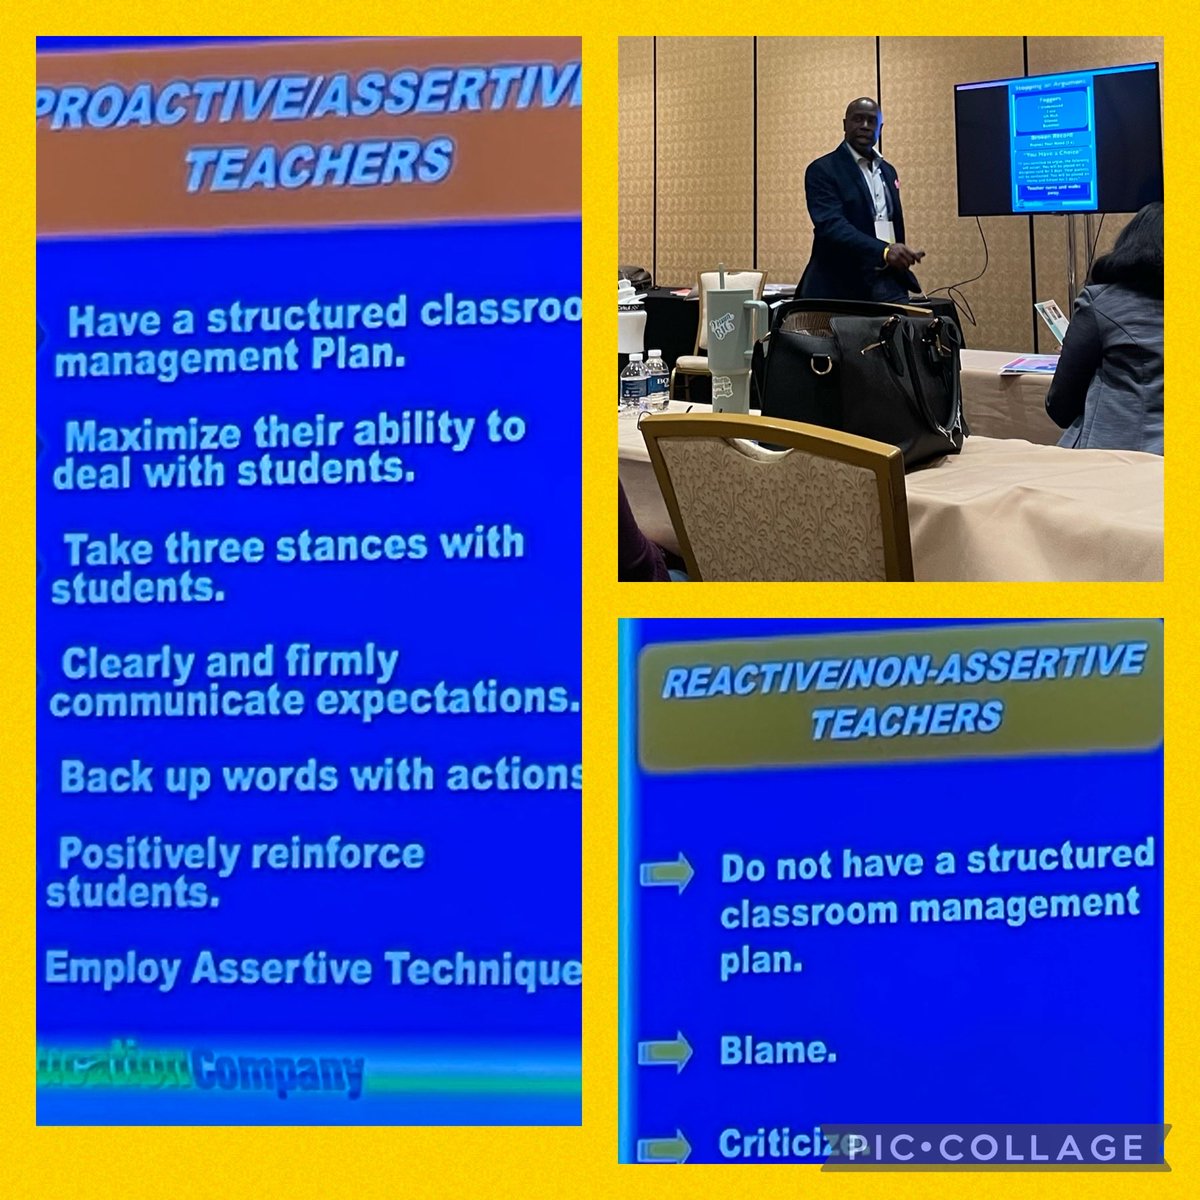 Thank you ⁦@ThomasGlanton⁩ for the amazing session on strategies to engage all students! #proactiveteachers ⁦@NASANevada⁩